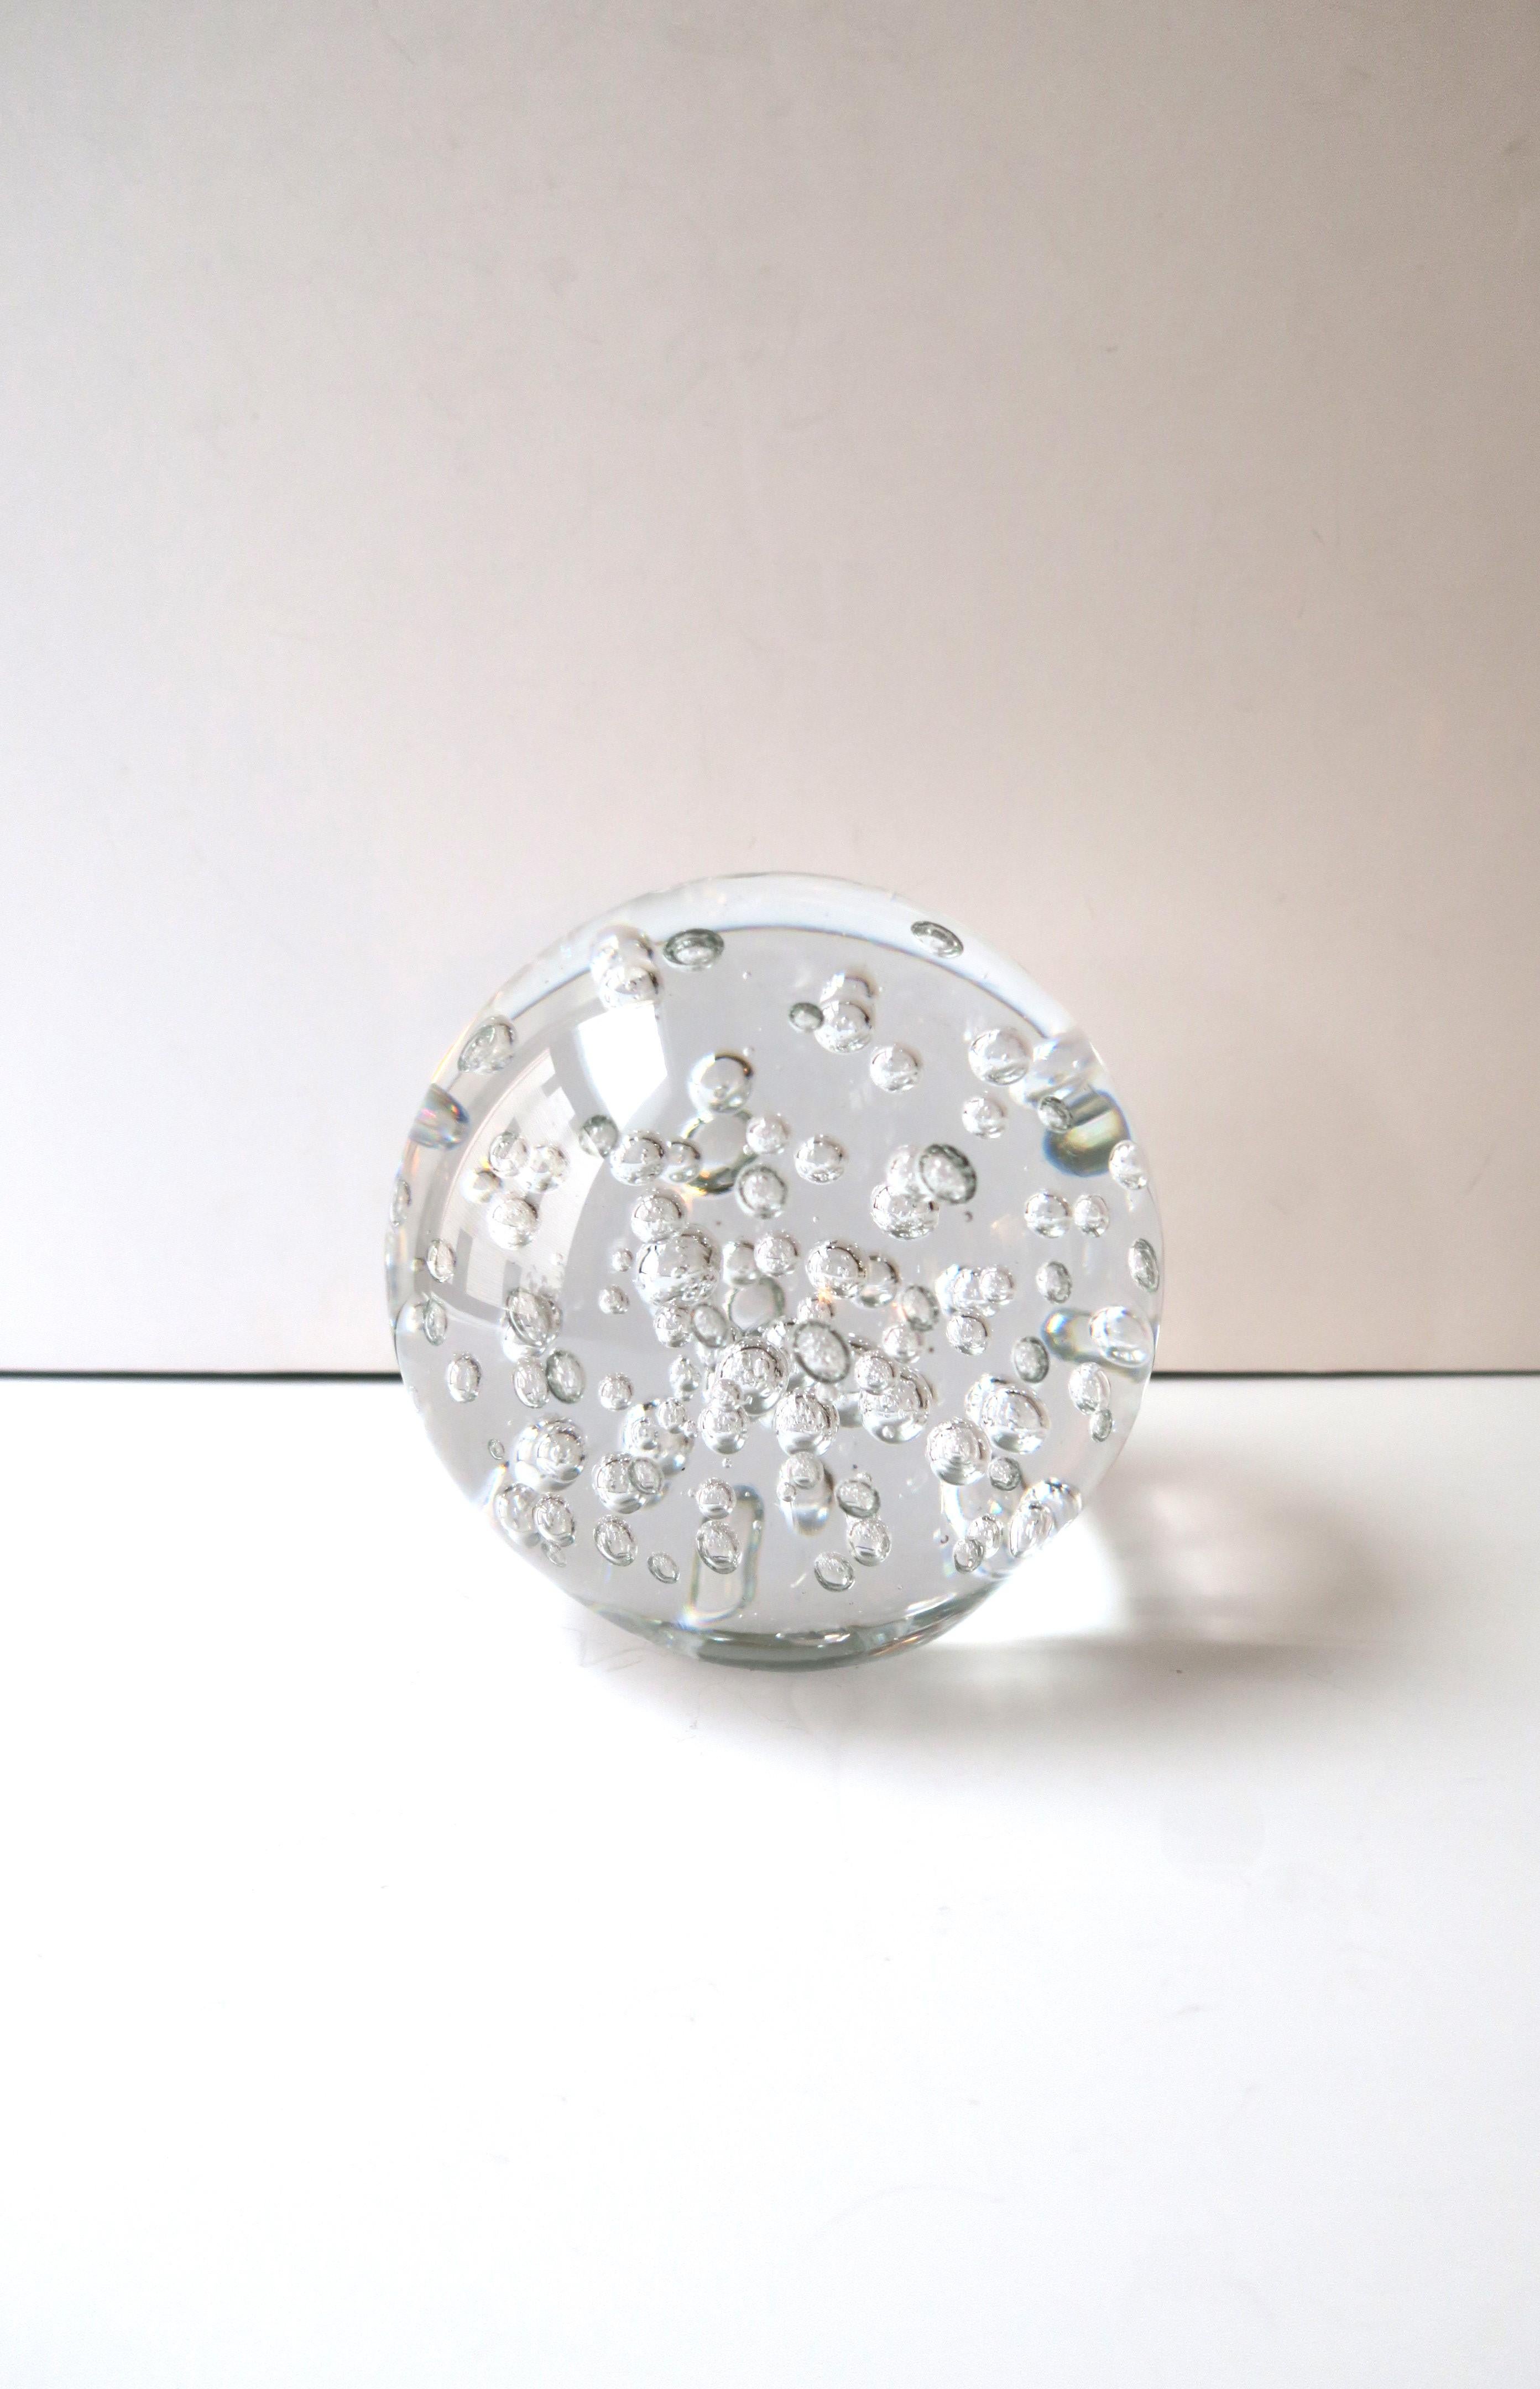 A relatively large, round, transparent art glass ball sphere with bubble design in the Modern style. A great decorative object. Place on a shelf, cocktail/coffee table, on top of books, credenza, etc. Sphere has flat bottom for stability. Excellent